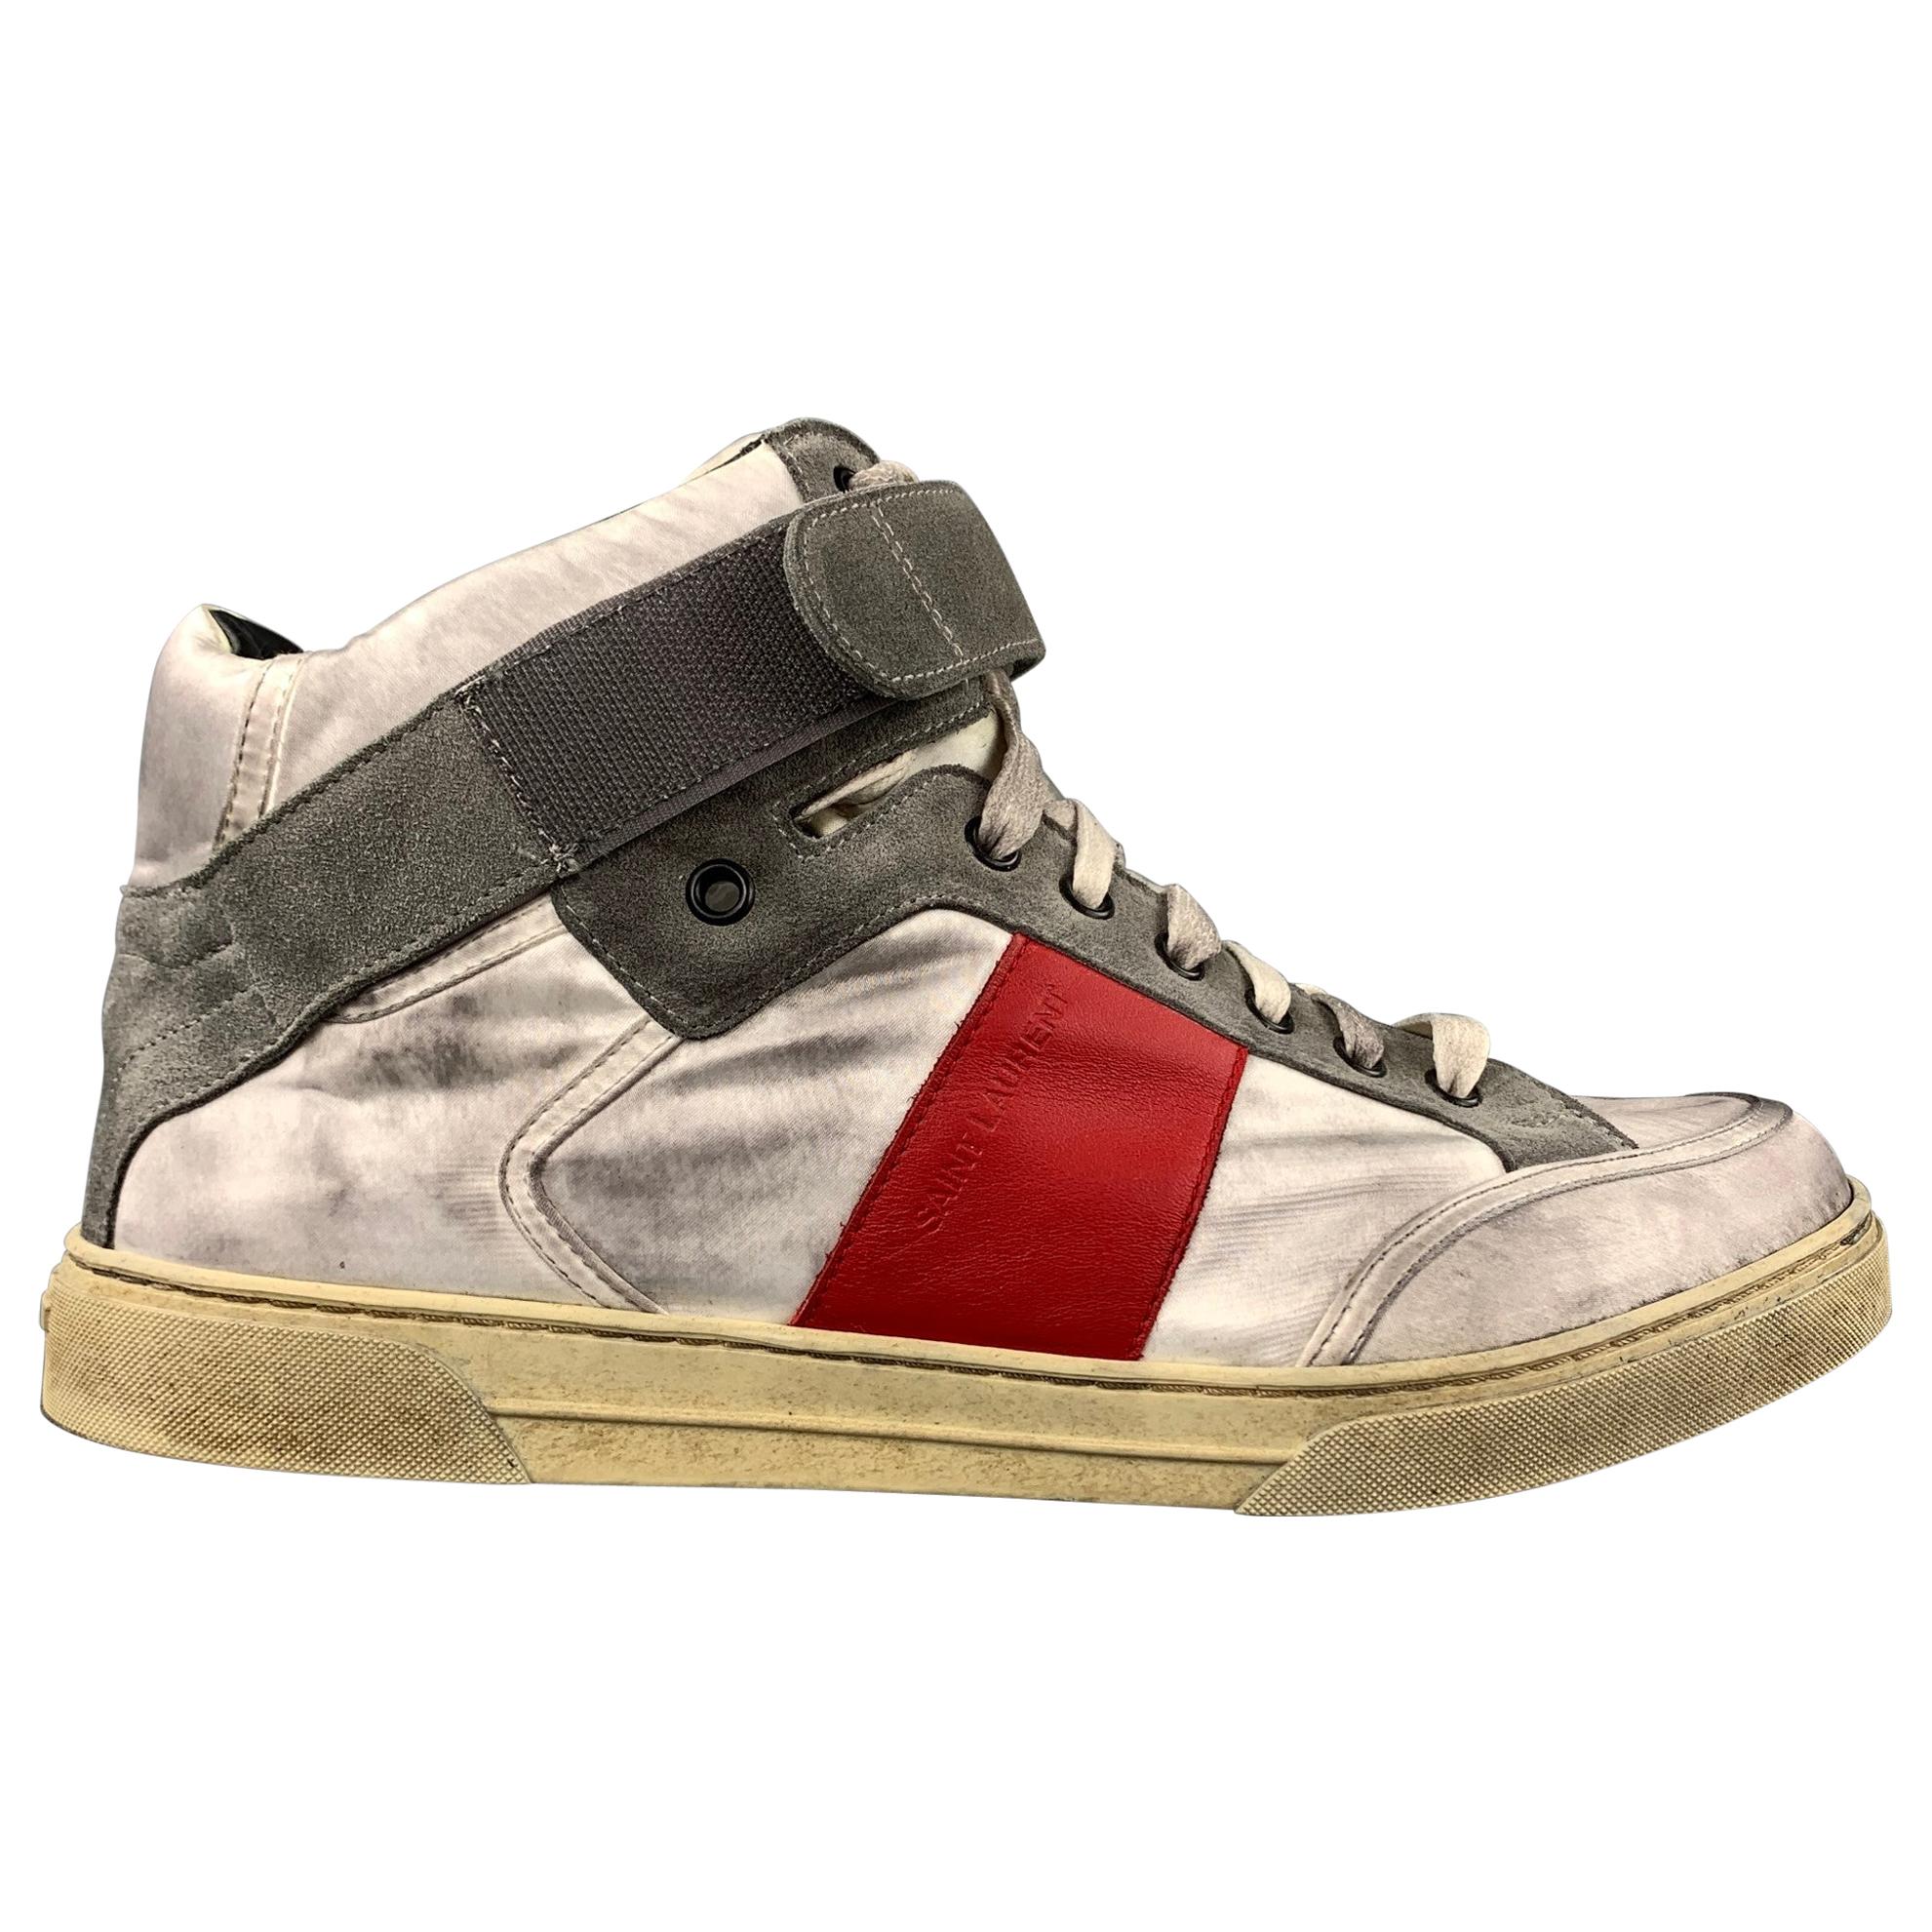 SAINT LAURENT Size 9 Silver Distressed Leather High Top Sneakers at 1stDibs